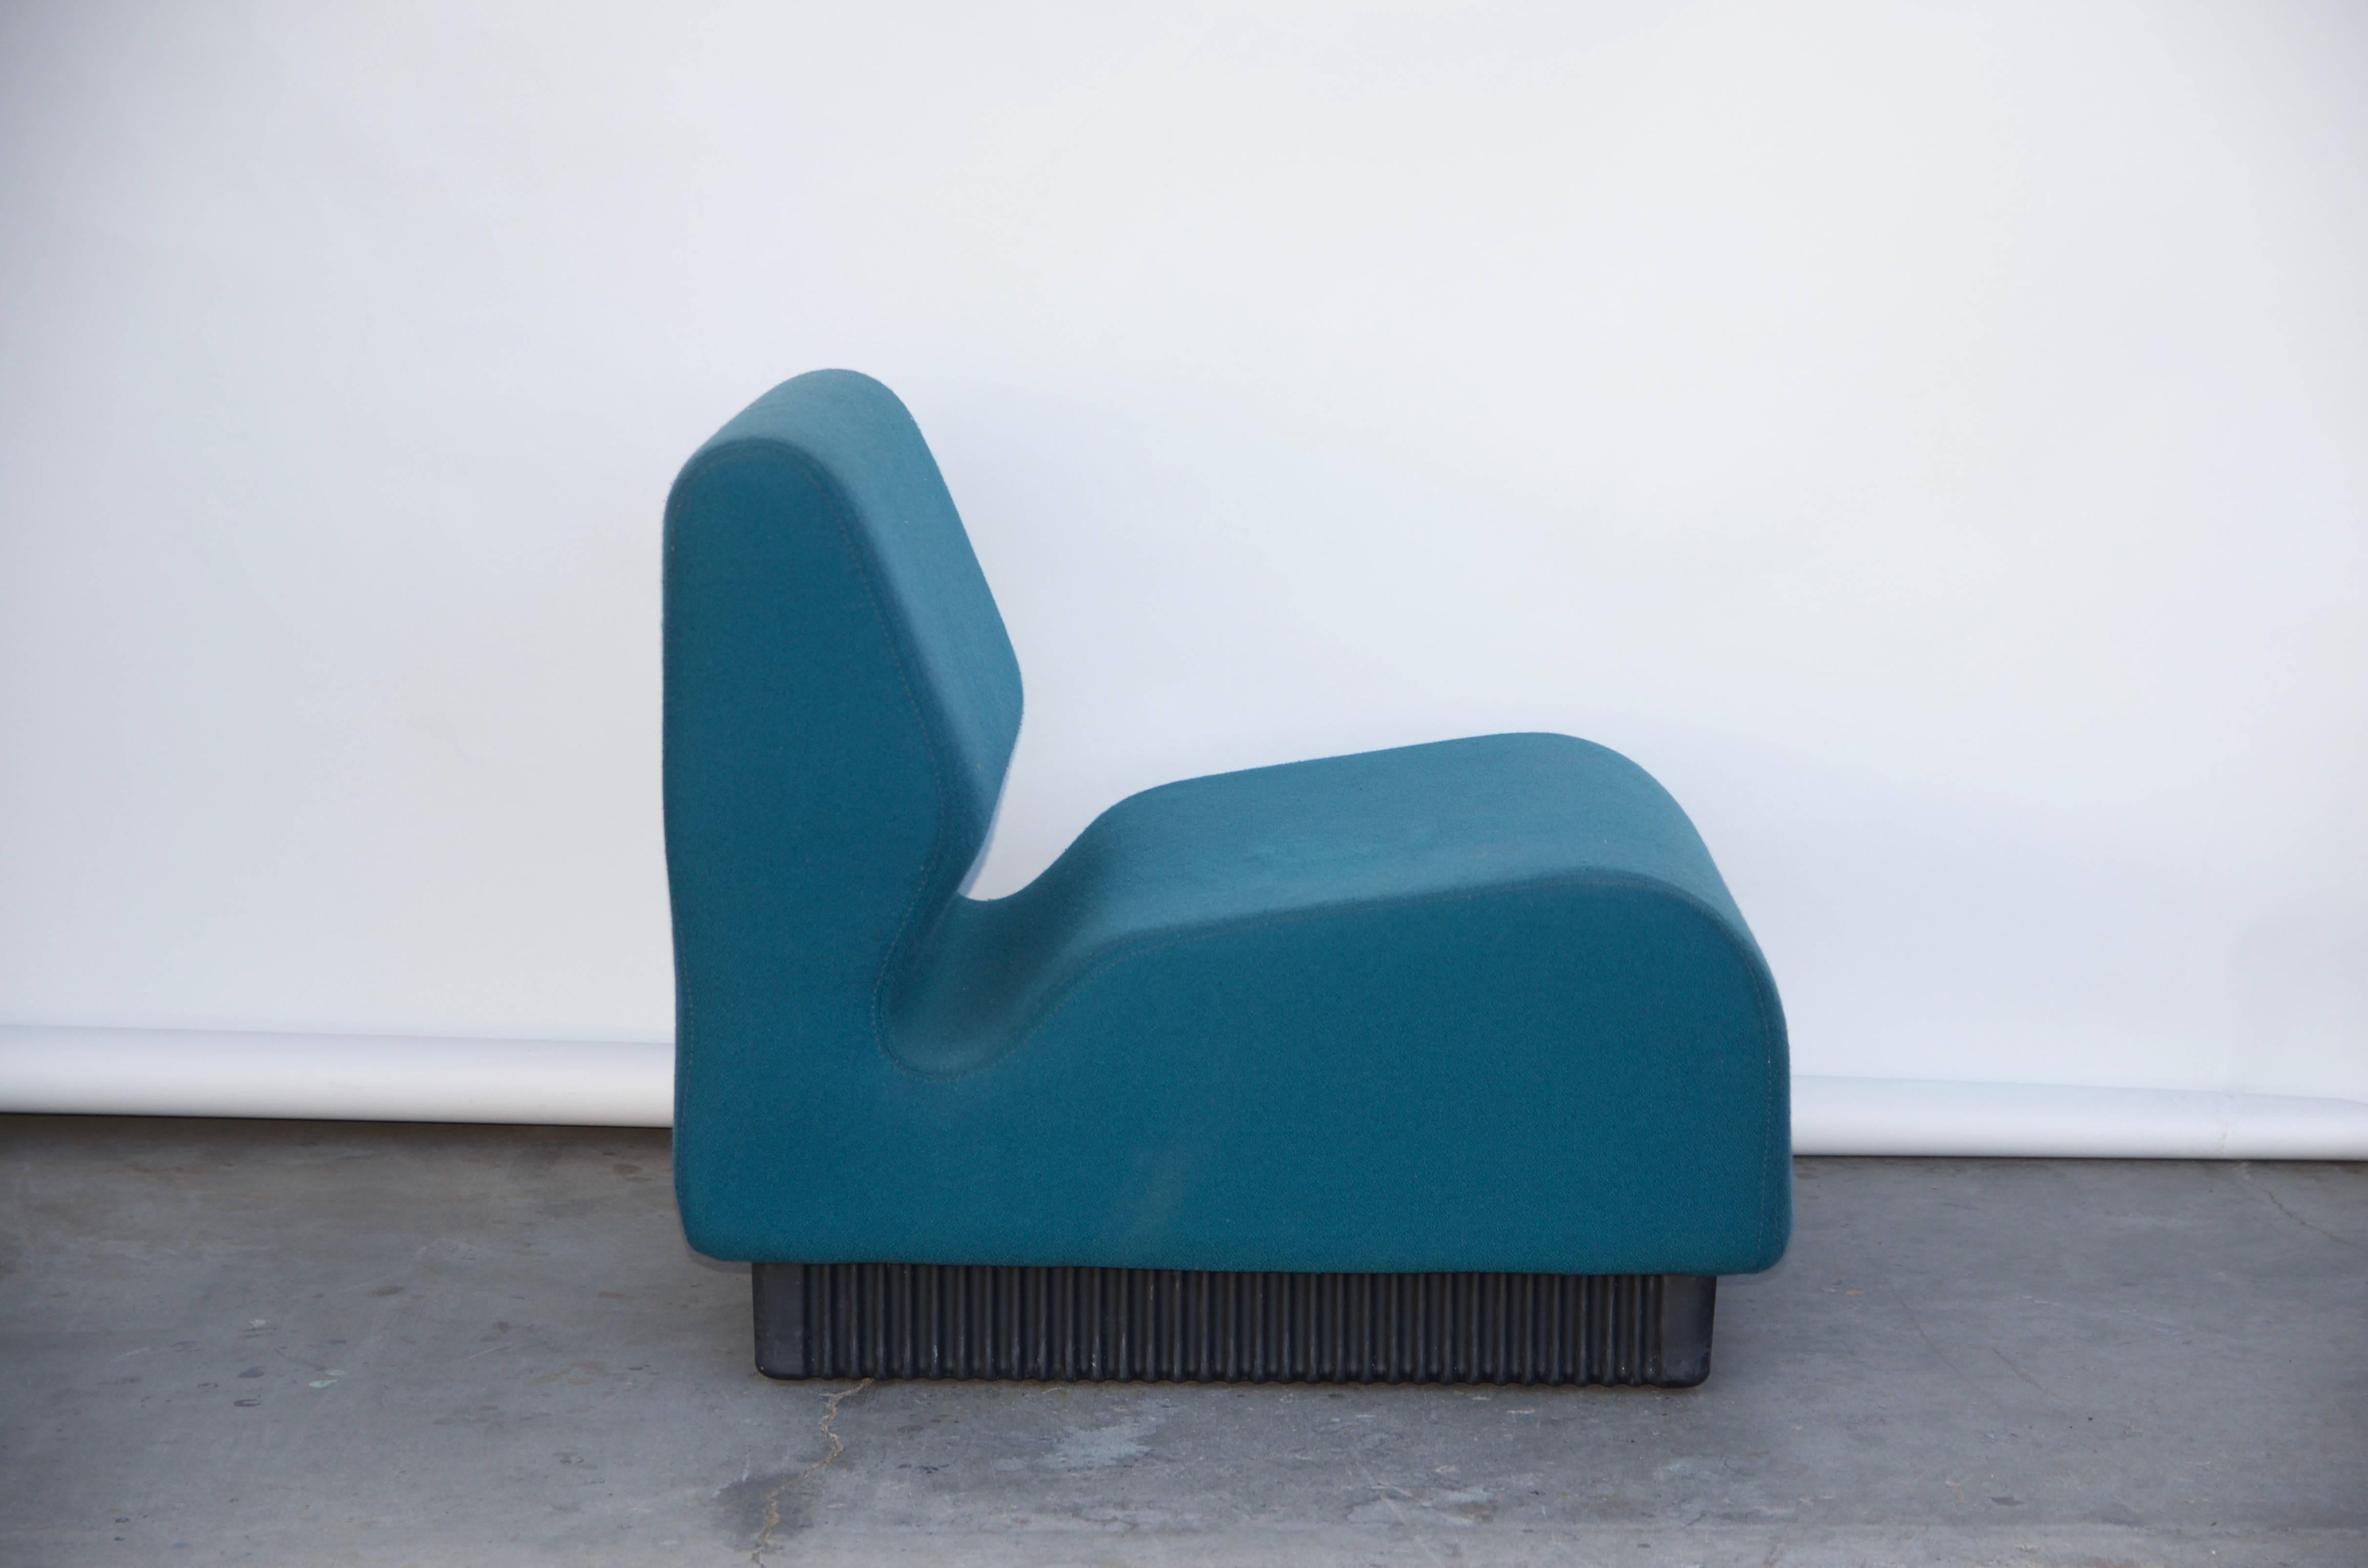 Late 20th Century Modular Settee by Don Chadwick for Herman Miller